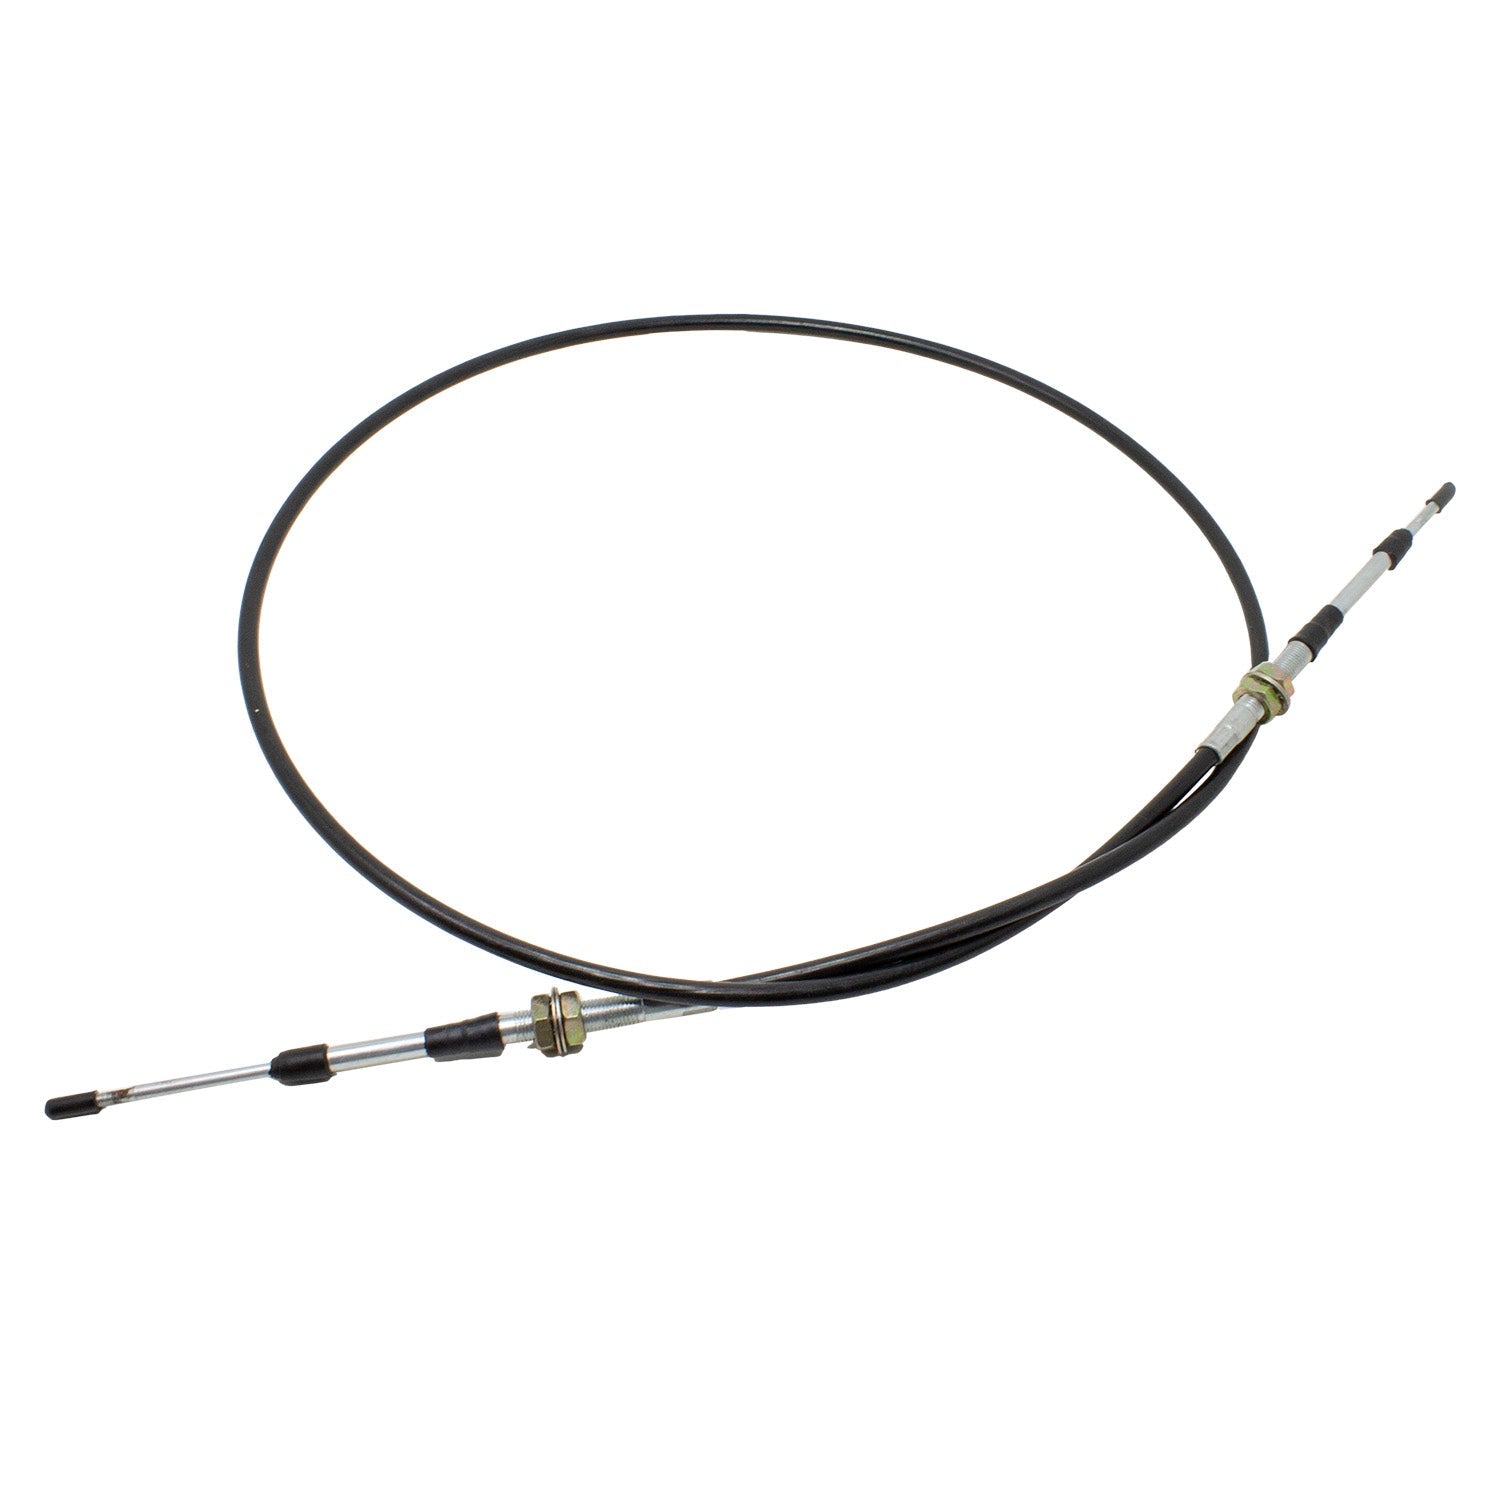 Duraforce 87340754, Throttle Cable For Case